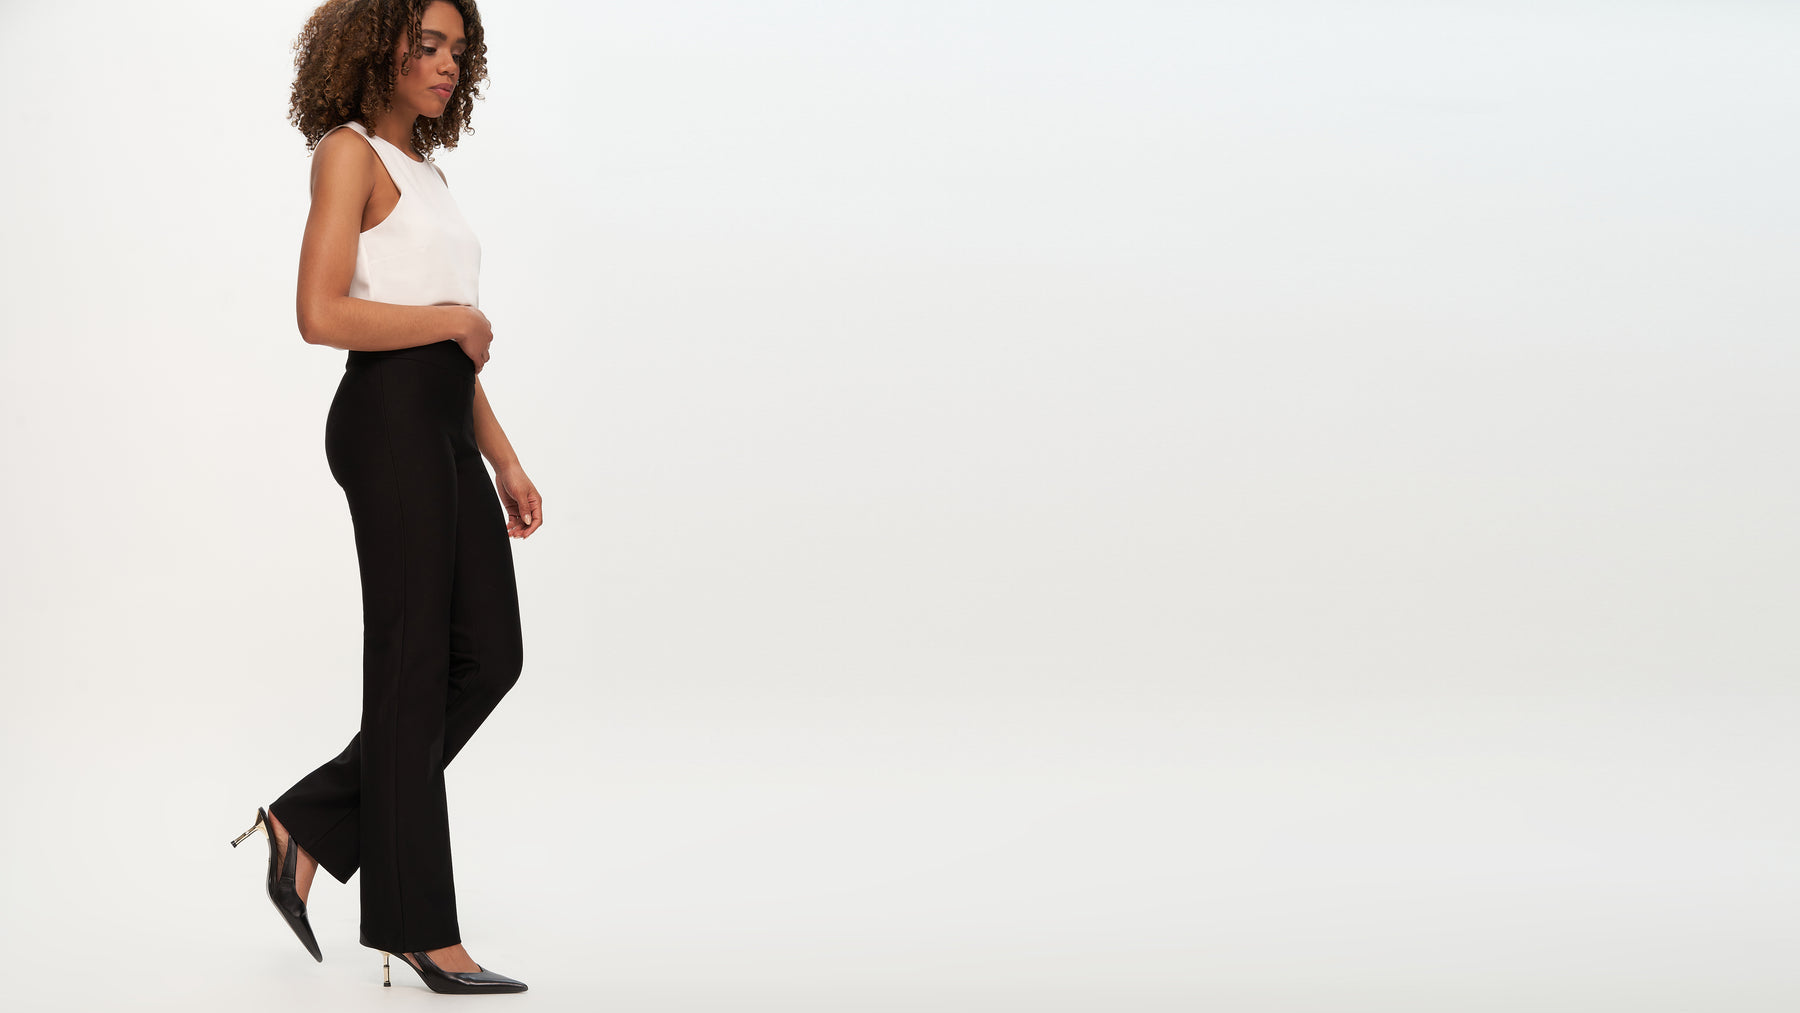 Our Best Slimming Outfit Tips For Back-to-work – SLIMMING, 42% OFF